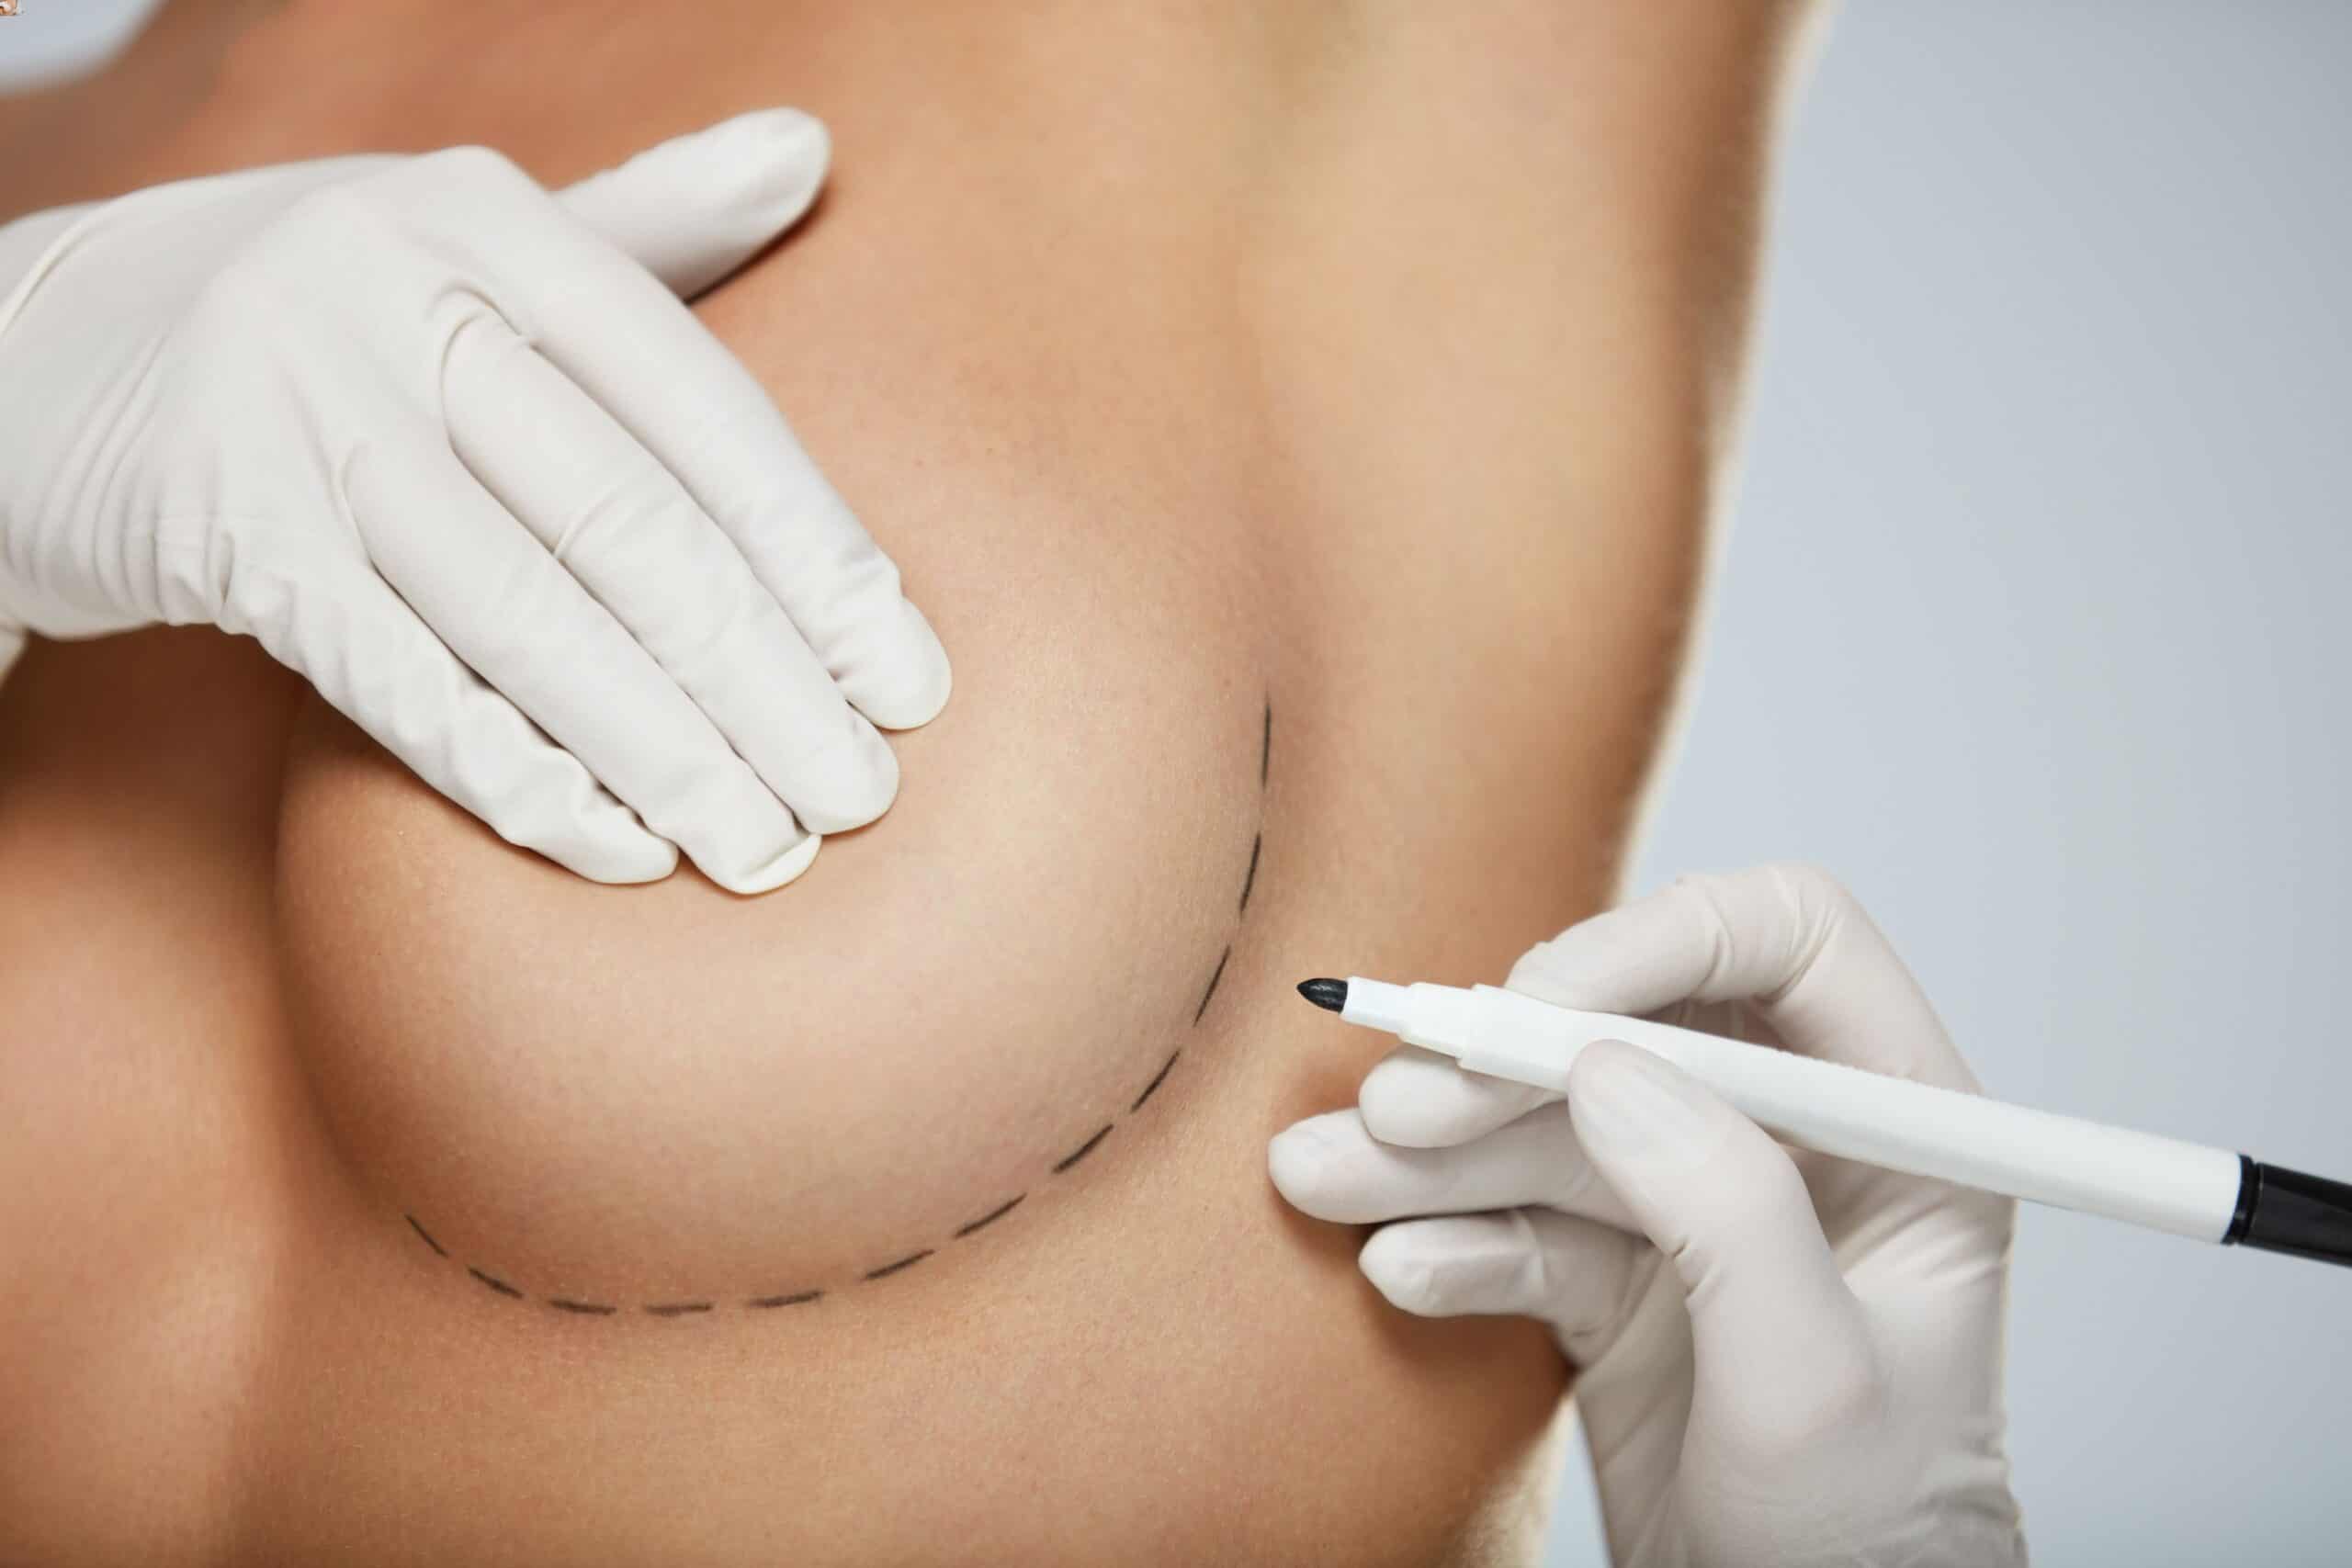 How to Get Natural Looking Breasts with Breast Enlargement Surgery?